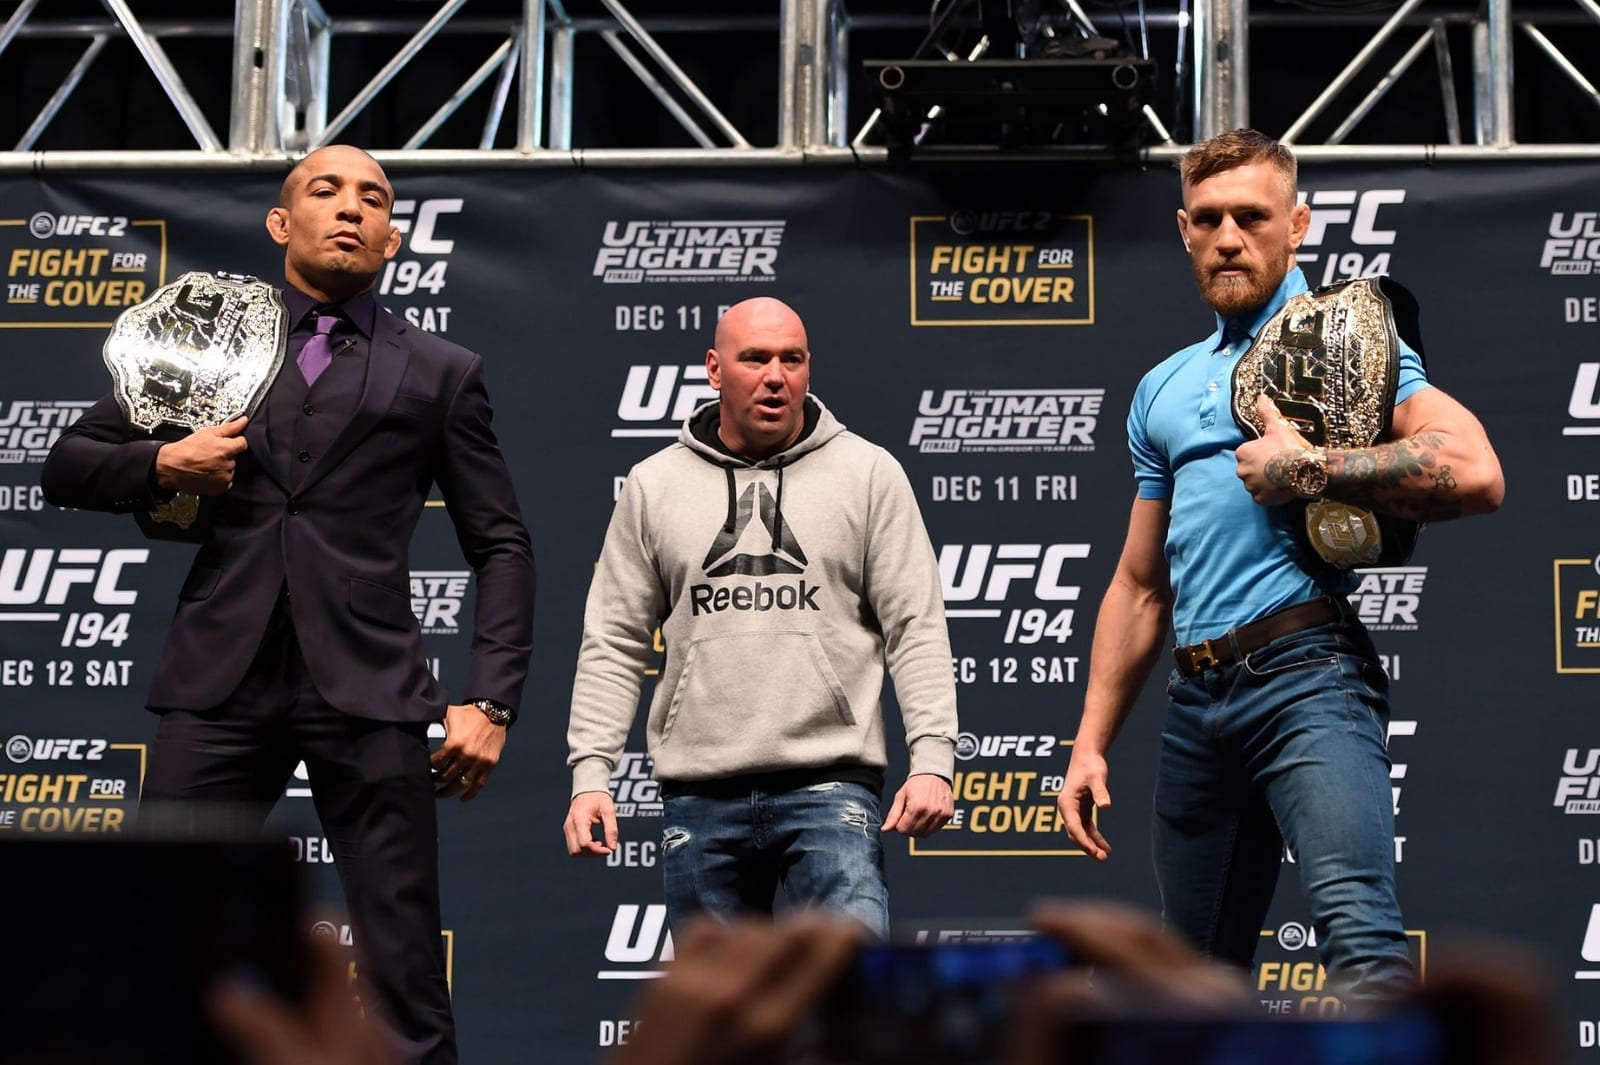 Jose Aldo says he’ll ‘never’ wrestle Conor McGregor again however admits he ‘roots’ for him, hopes he ‘becomes champion again’